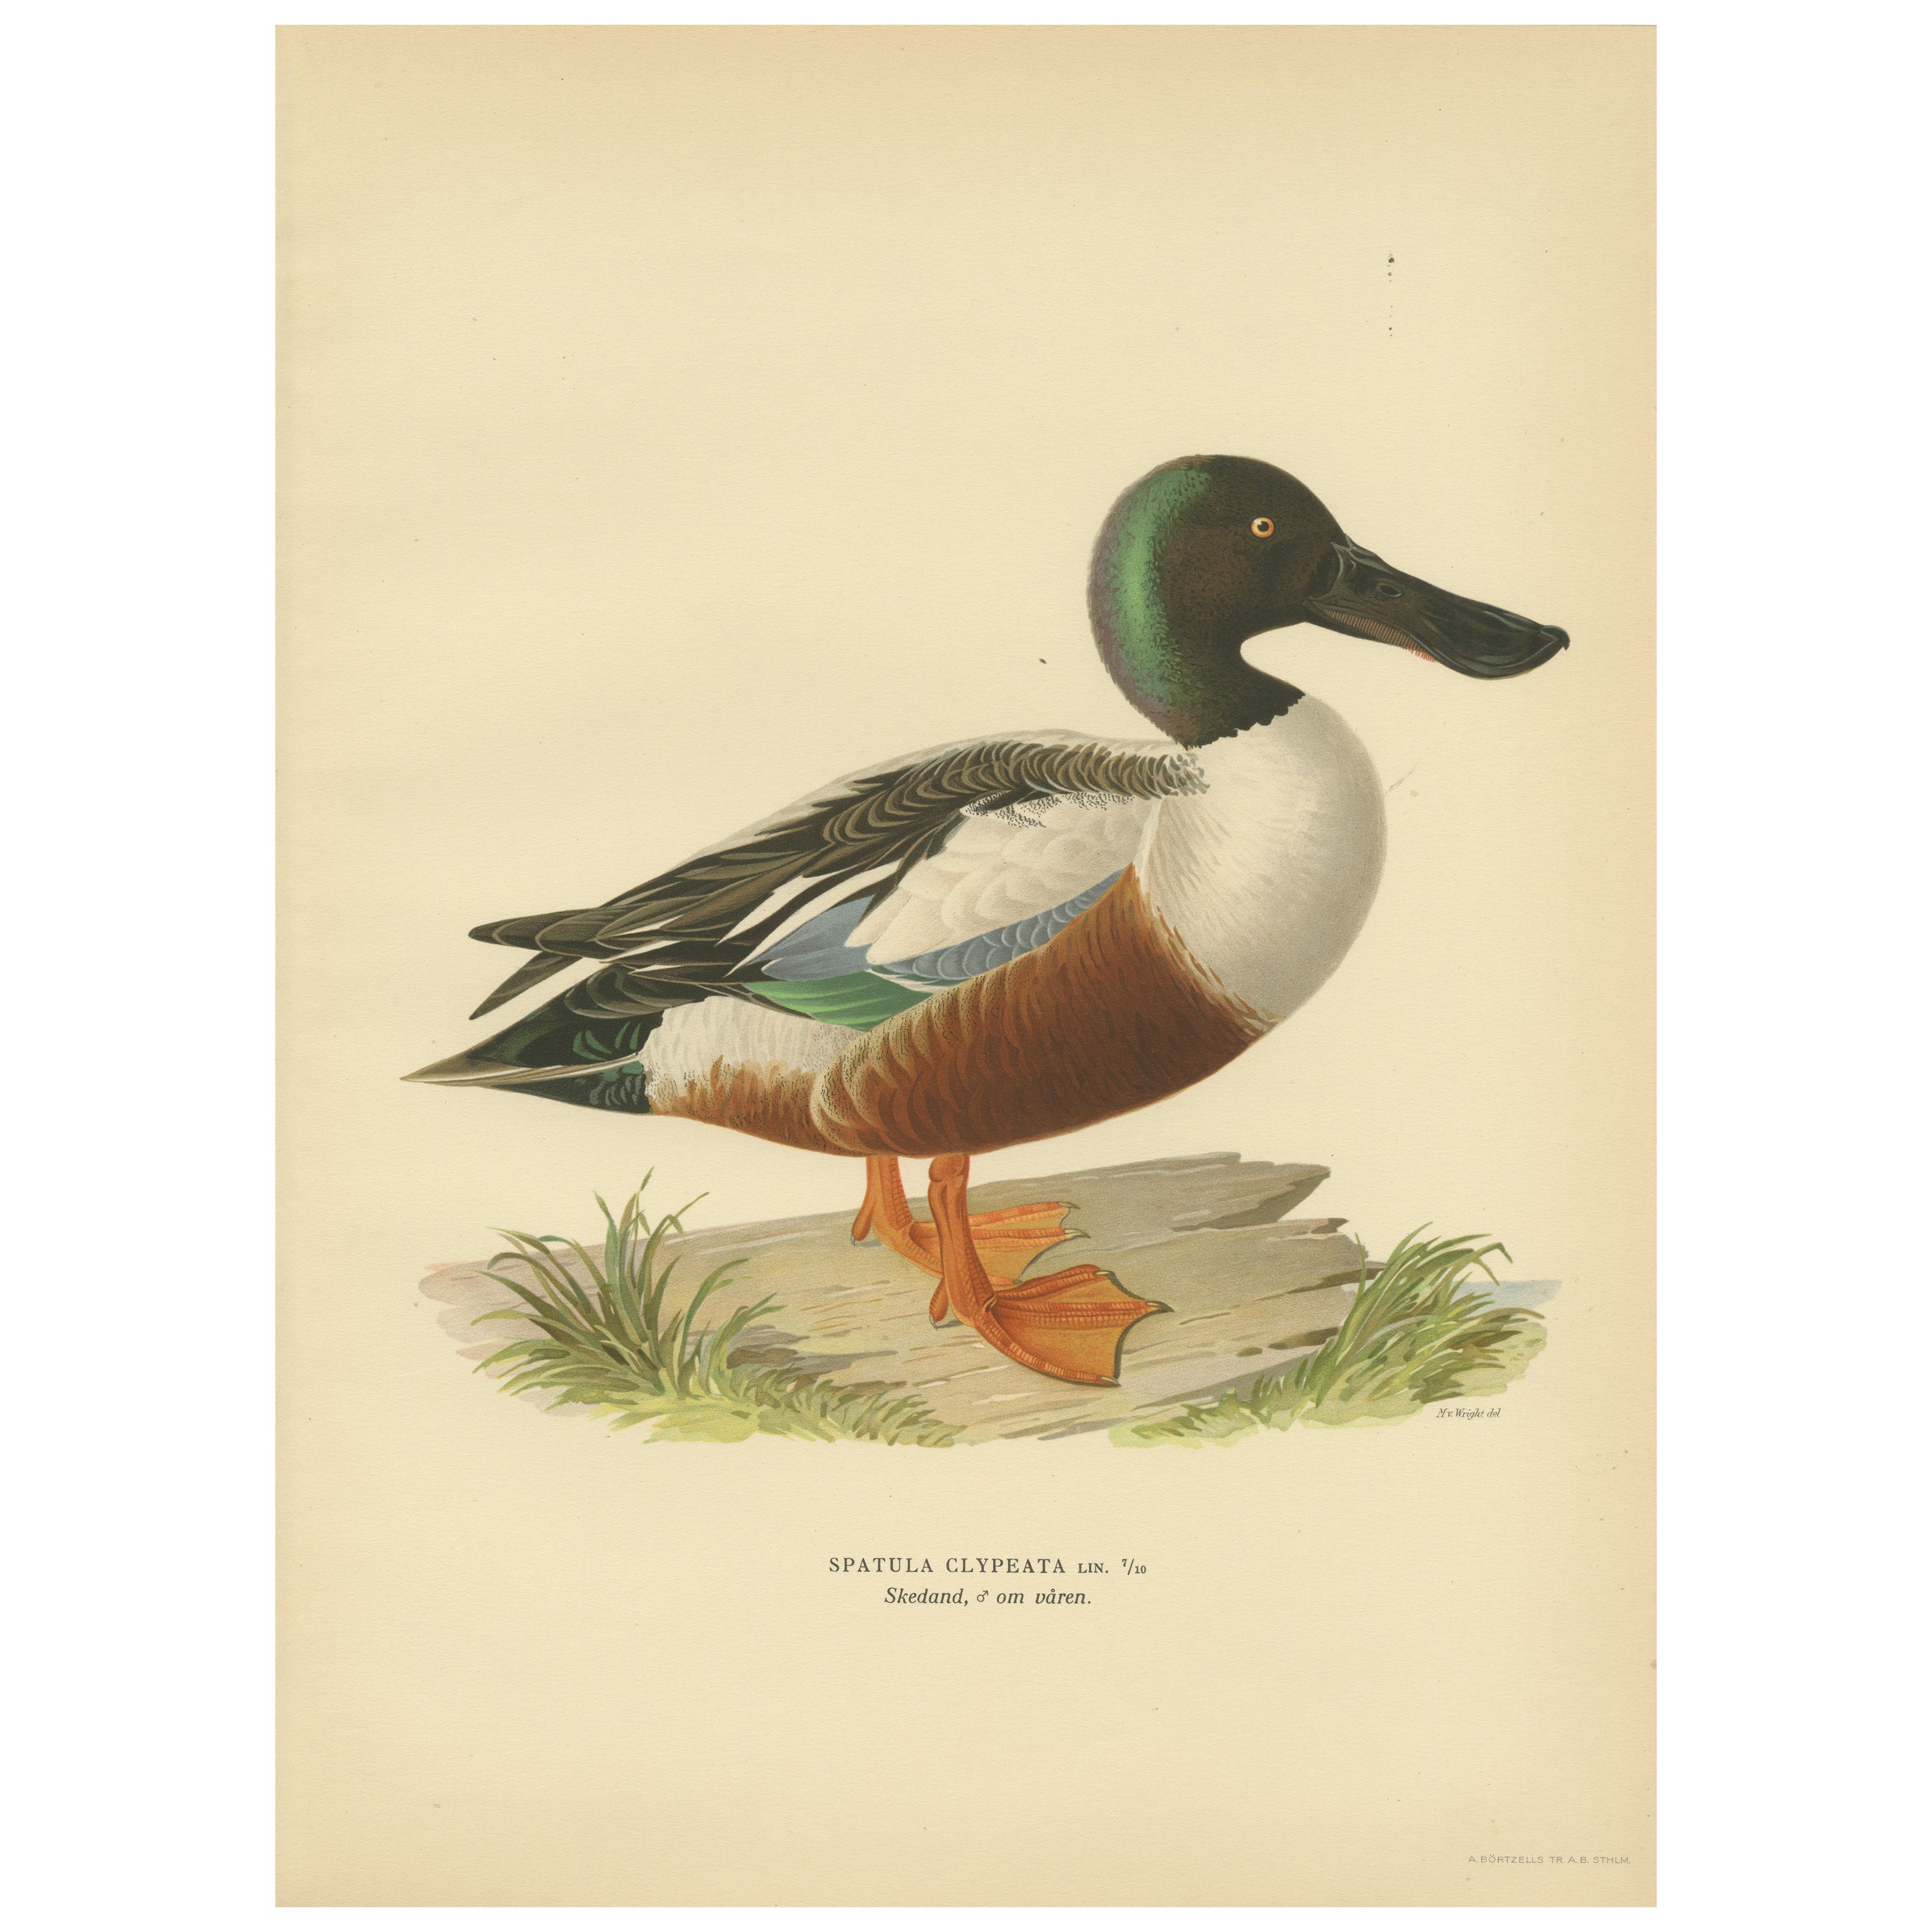 Northern Shoveler in Detail: A Study of Spatula Clypeata in Lithograph, 1929